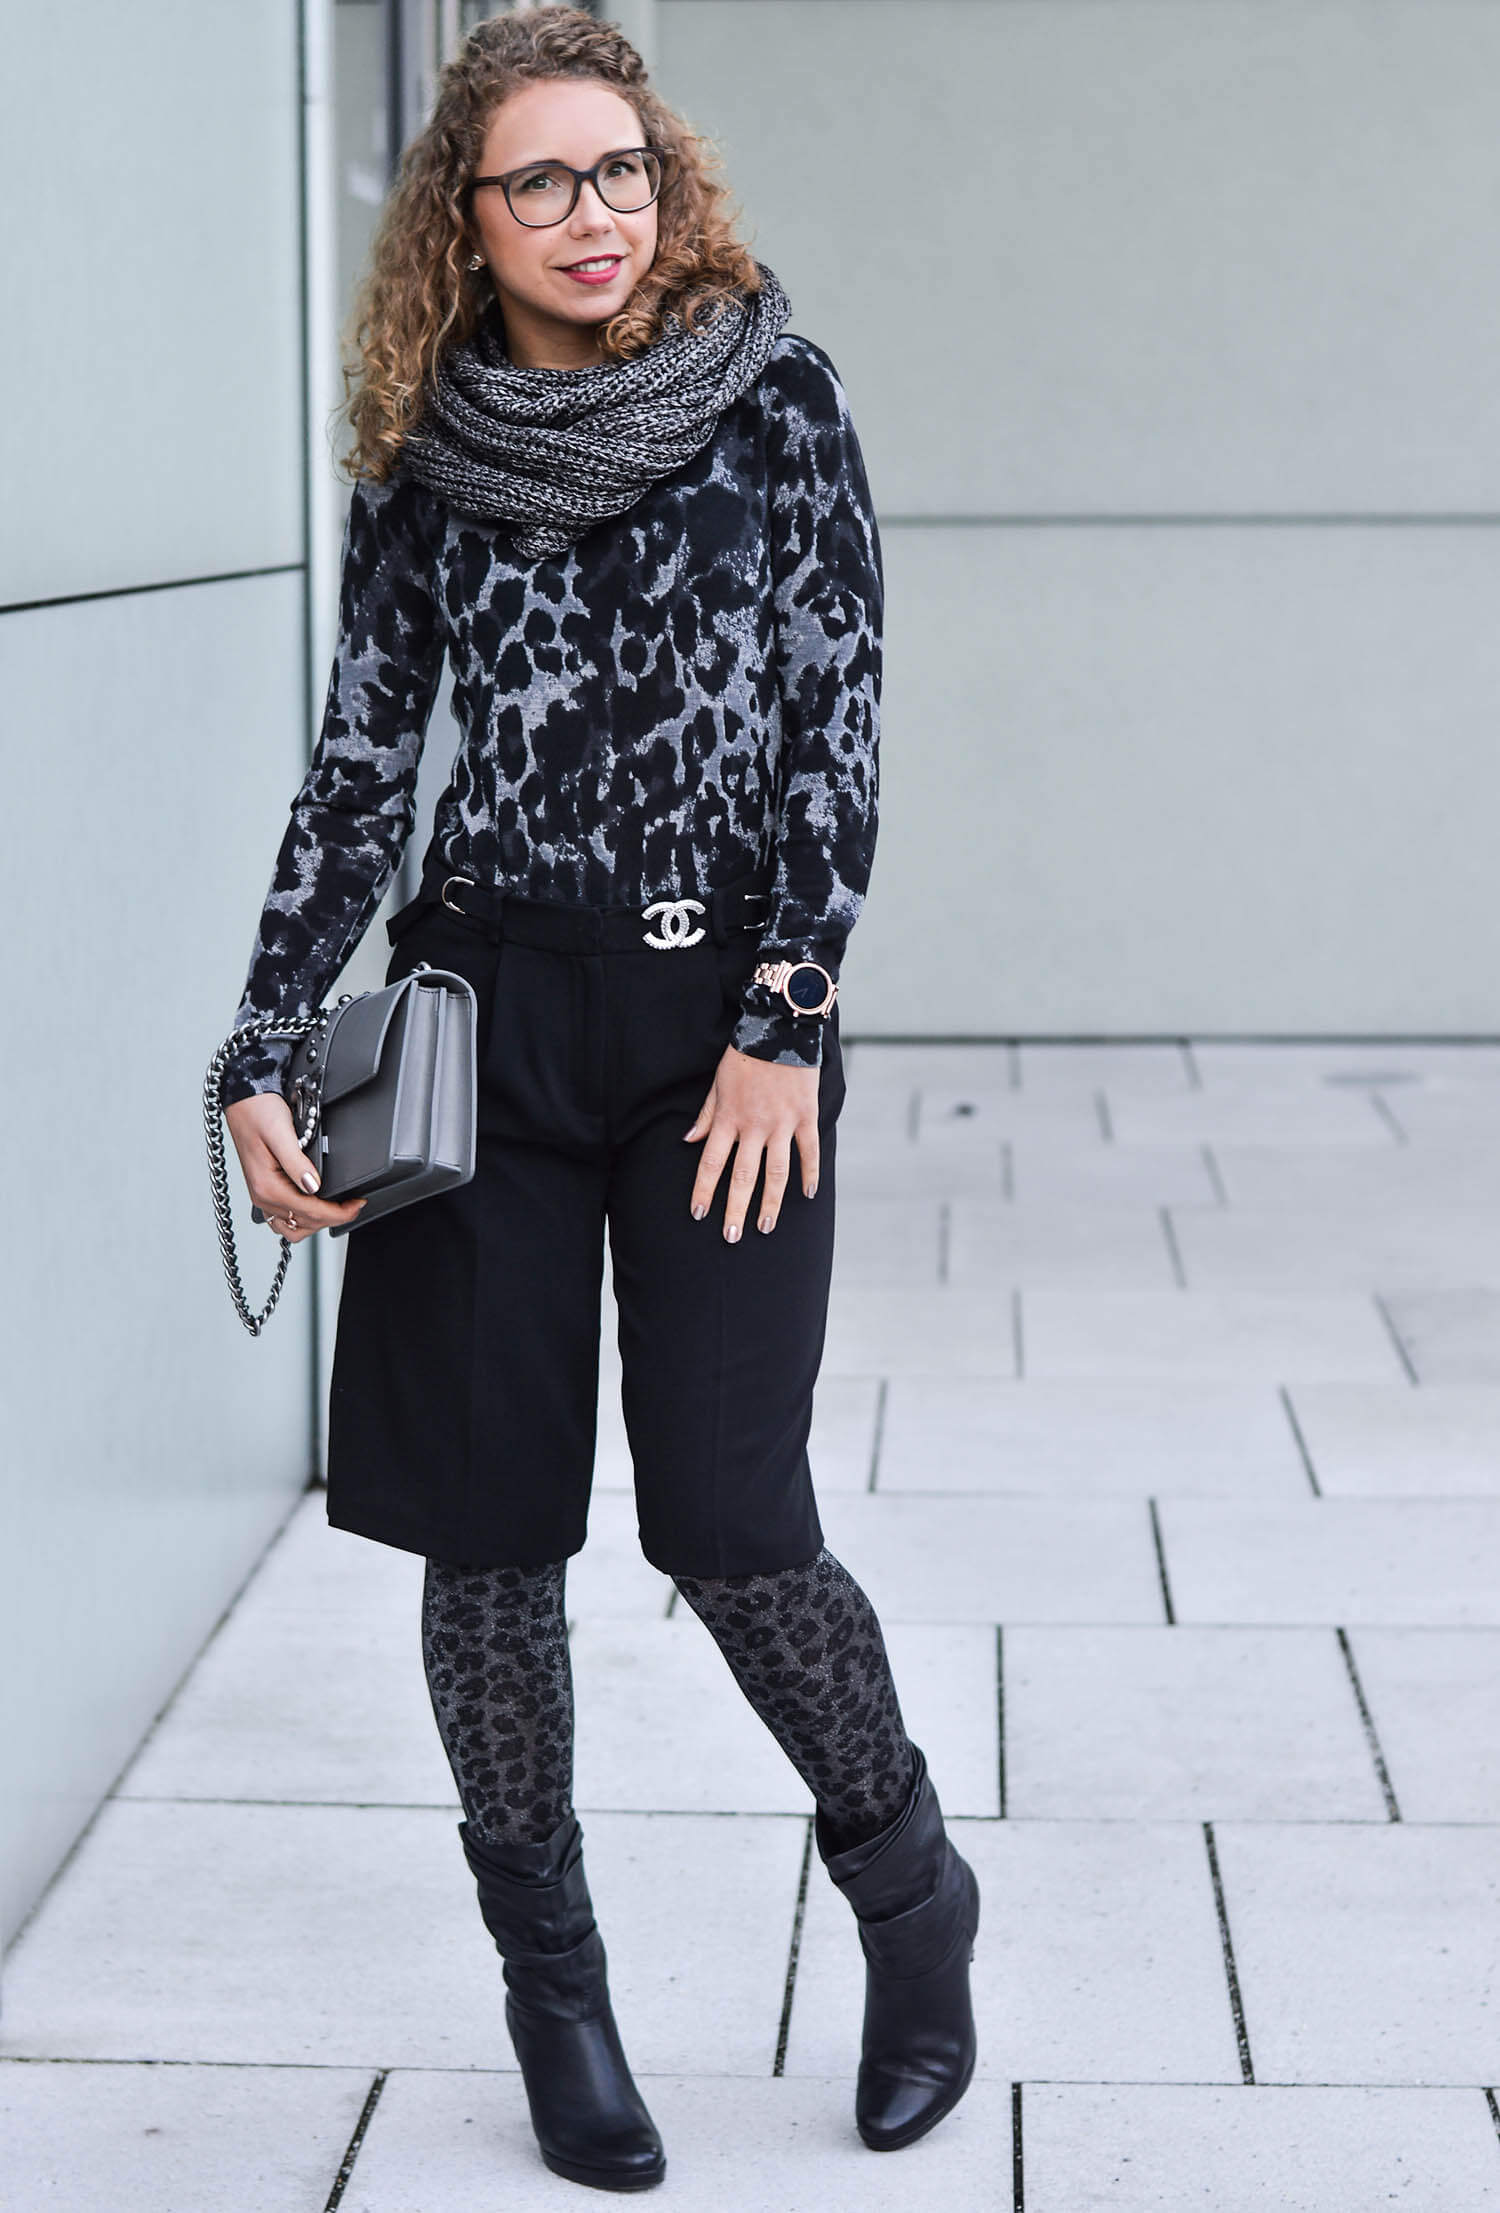 Kationette-Outfit-Grey-Leopard-with-Drykorn-sweater-and-Calzedonia-tights-fashionblogger-nrw-streetstyle